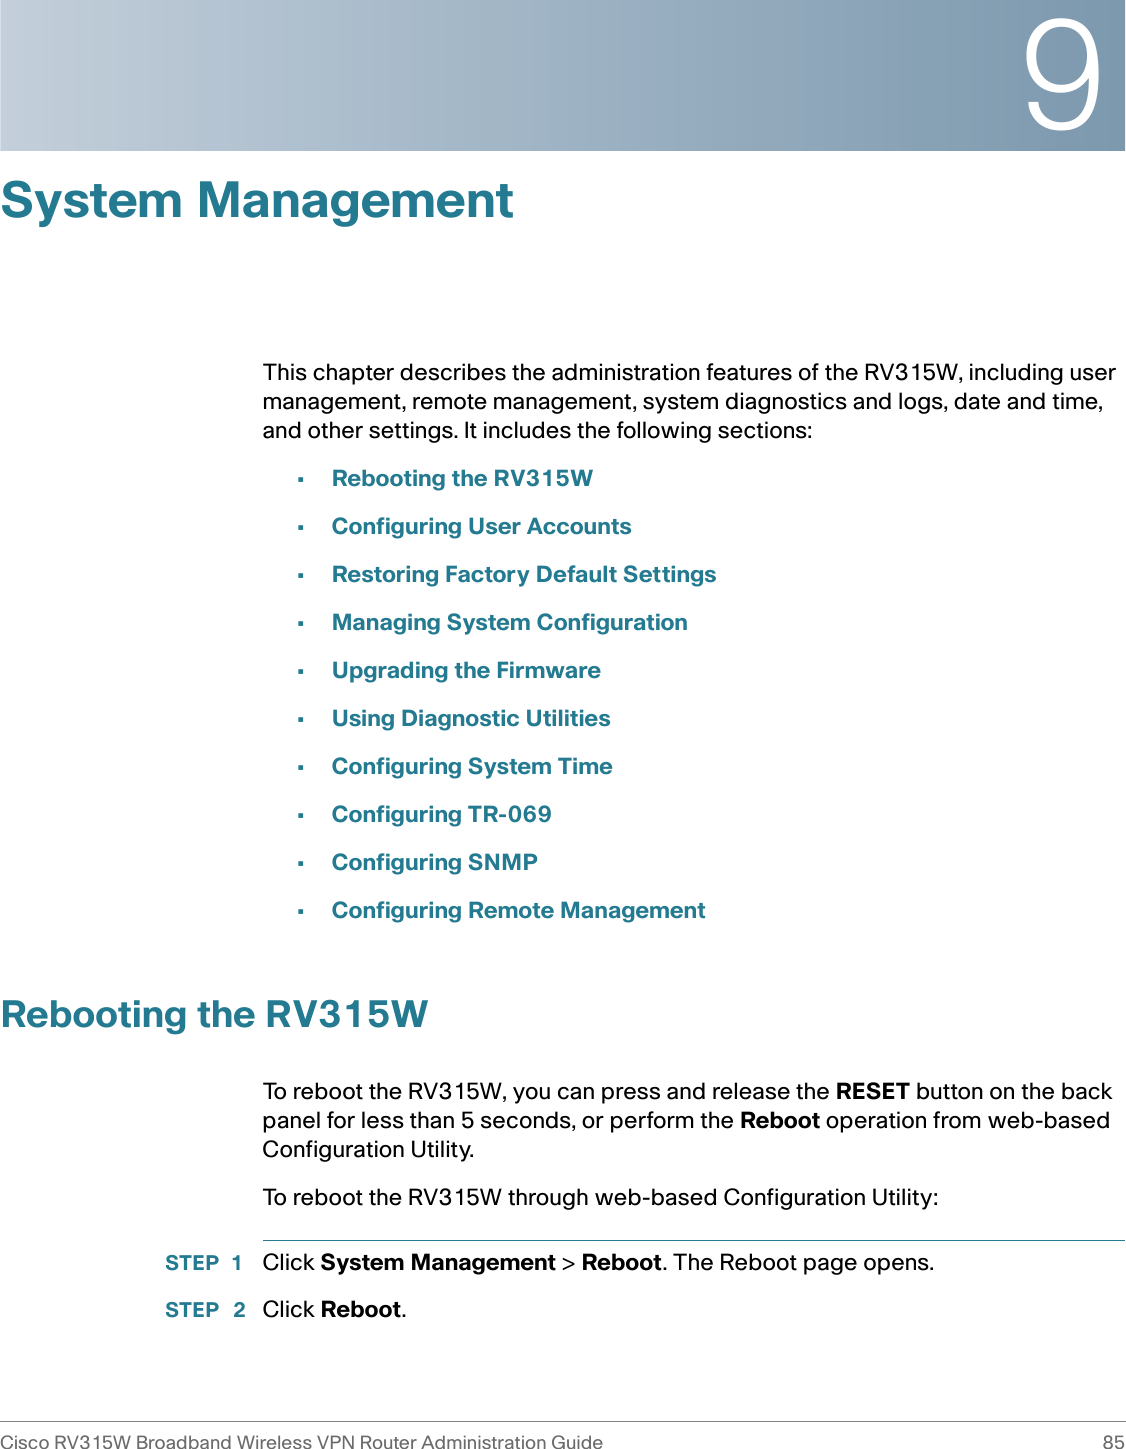 9Cisco RV315W Broadband Wireless VPN Router Administration Guide 85System ManagementThis chapter describes the administration features of the RV315W, including user management, remote management, system diagnostics and logs, date and time, and other settings. It includes the following sections:•Rebooting the RV315W•Configuring User Accounts•Restoring Factory Default Settings•Managing System Configuration•Upgrading the Firmware•Using Diagnostic Utilities•Configuring System Time•Configuring TR-069•Configuring SNMP•Configuring Remote ManagementRebooting the RV315WTo reboot the RV315W, you can press and release the RESET button on the back panel for less than 5 seconds, or perform the Reboot operation from web-based Configuration Utility. To reboot the RV315W through web-based Configuration Utility: STEP 1 Click System Management &gt; Reboot. The Reboot page opens.STEP  2 Click Reboot. 